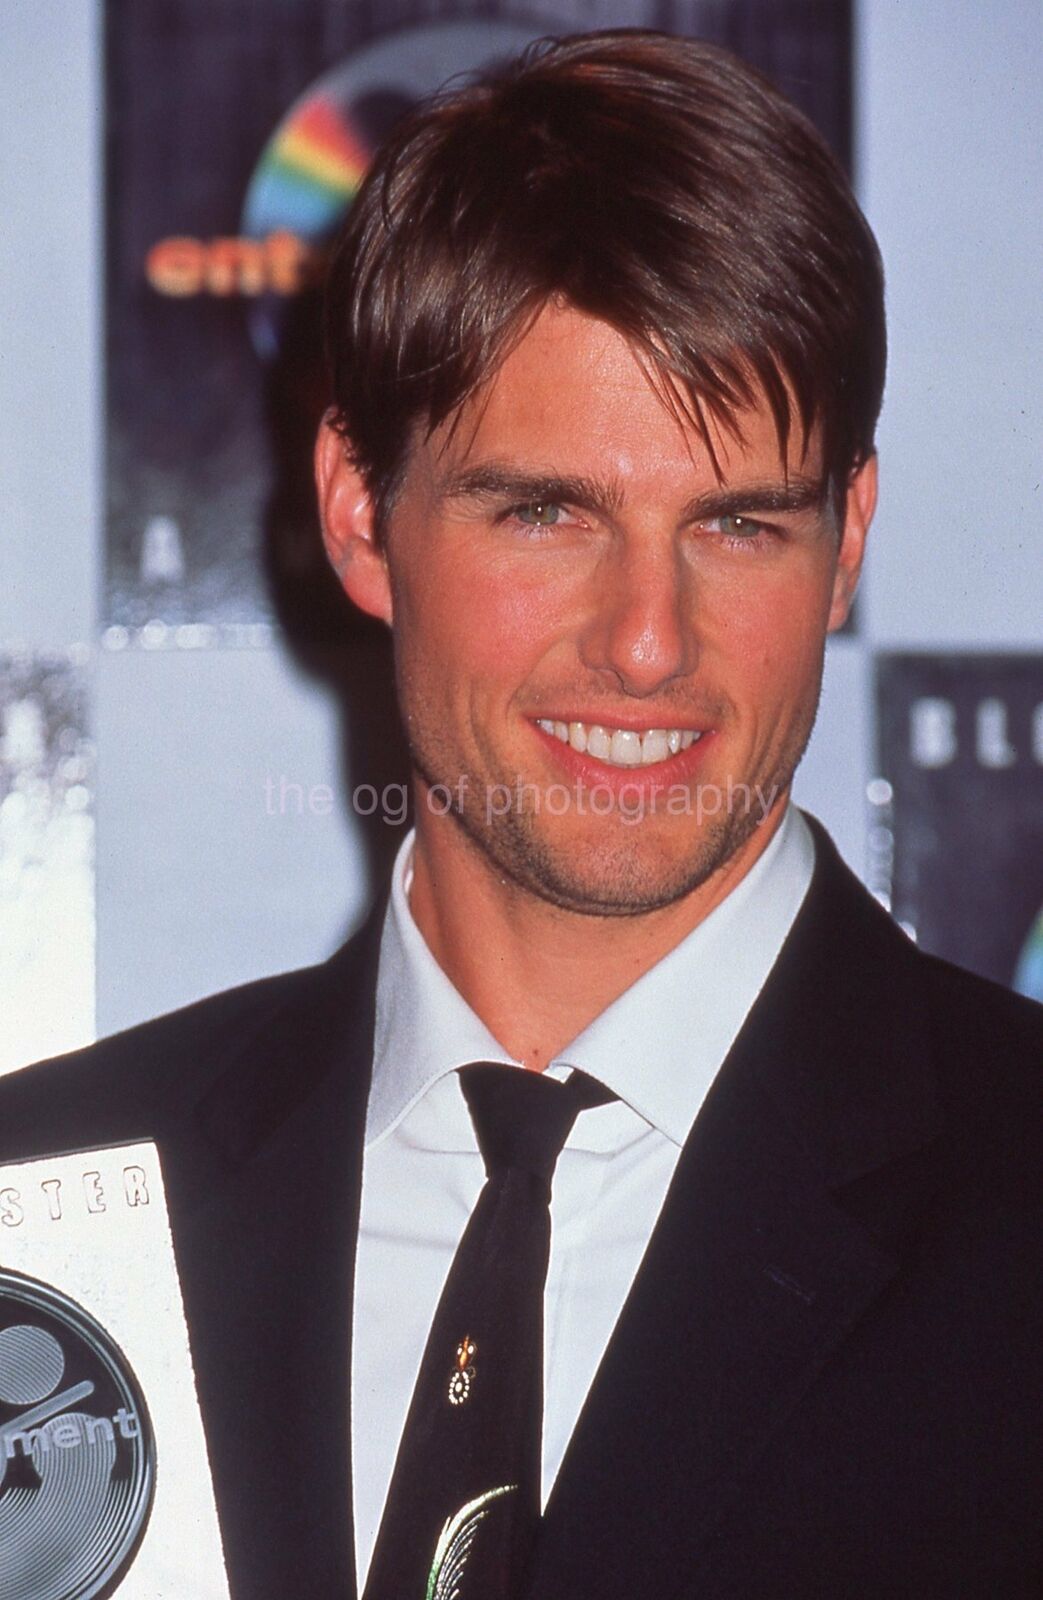 TOM CRUISE Vintage 35mm FOUND SLIDE Transparency MOVIE ACTOR Photo  010 T 11 Q